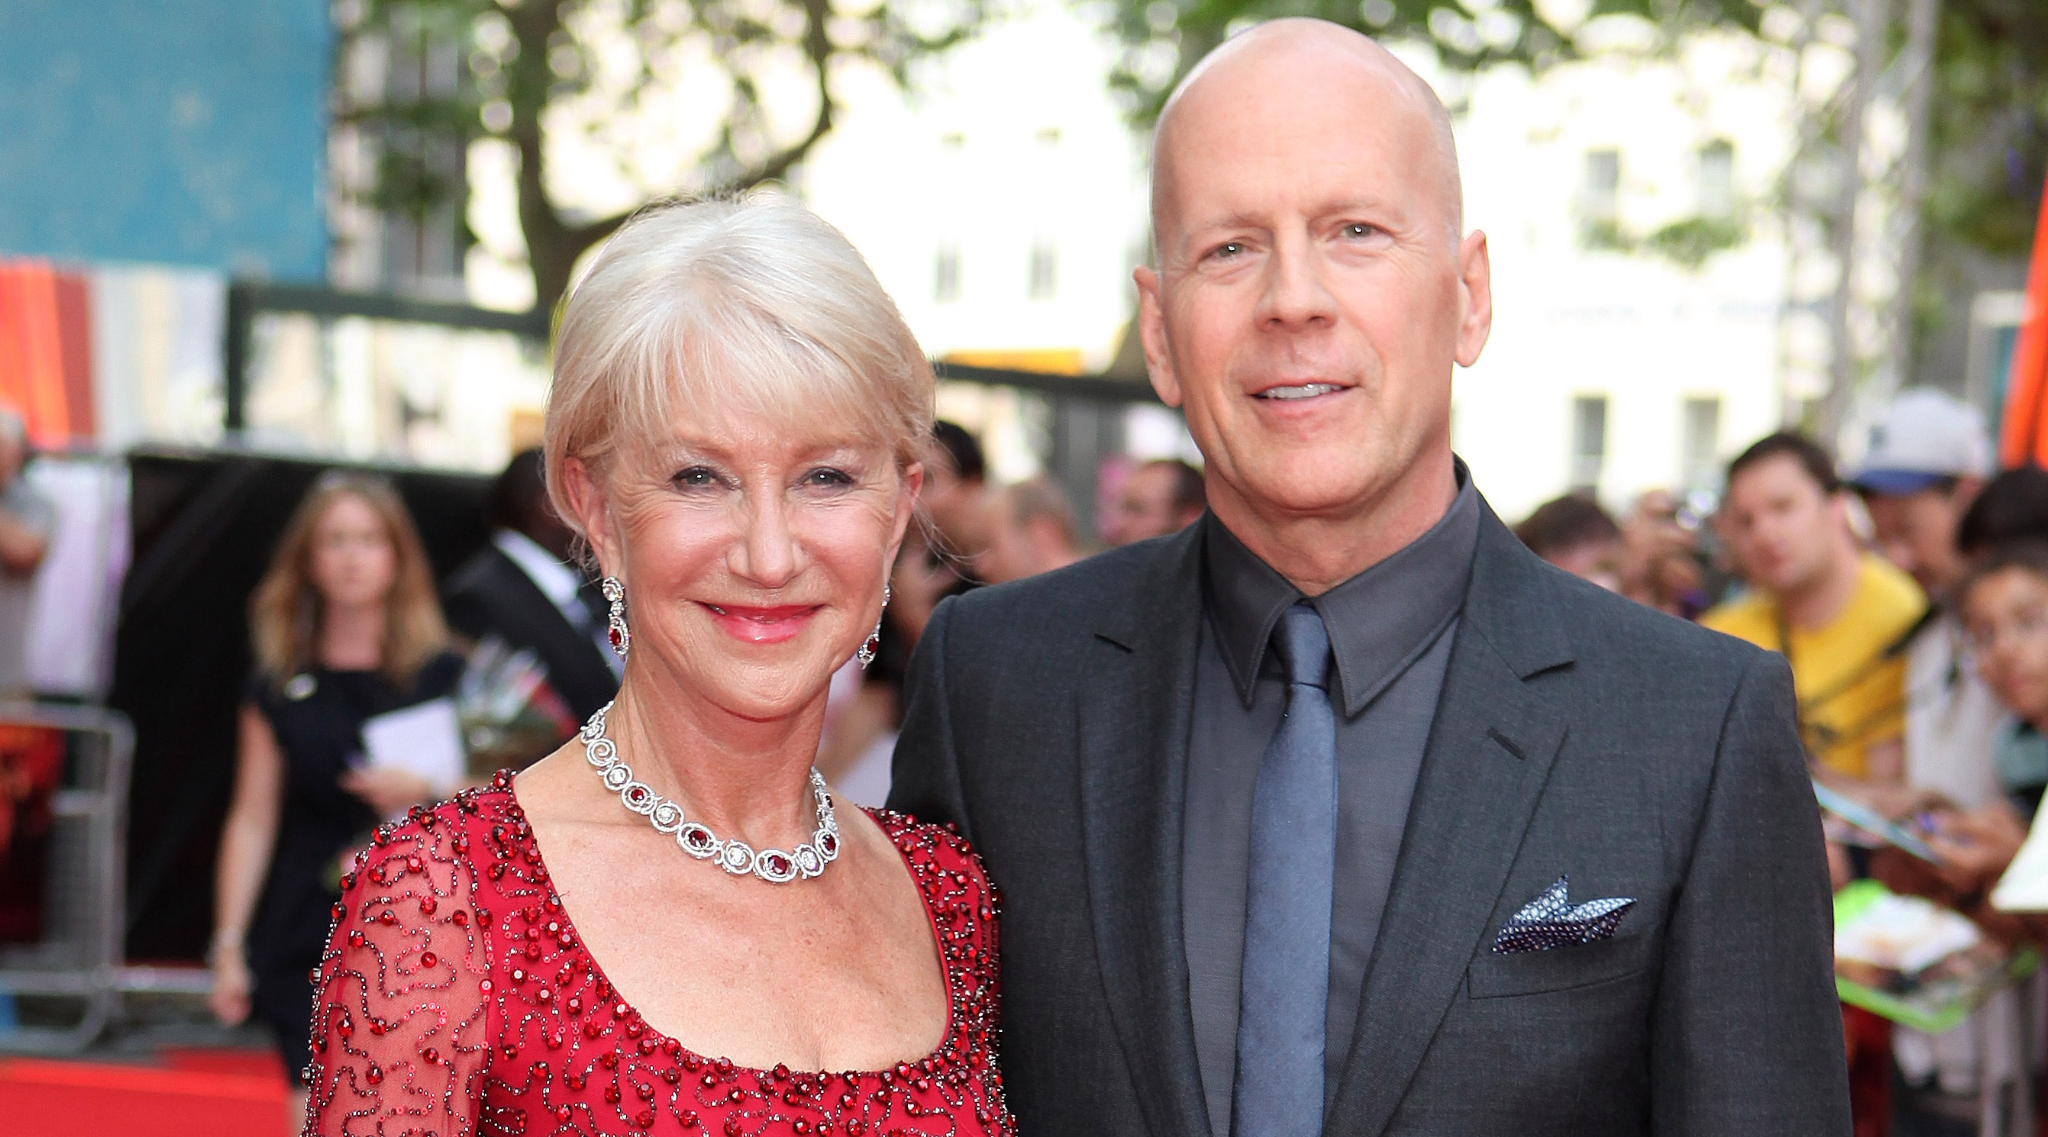 Helen Mirren Recalls Former Co-Star Bruce Willis 'Taught Me a Lot About Acting'